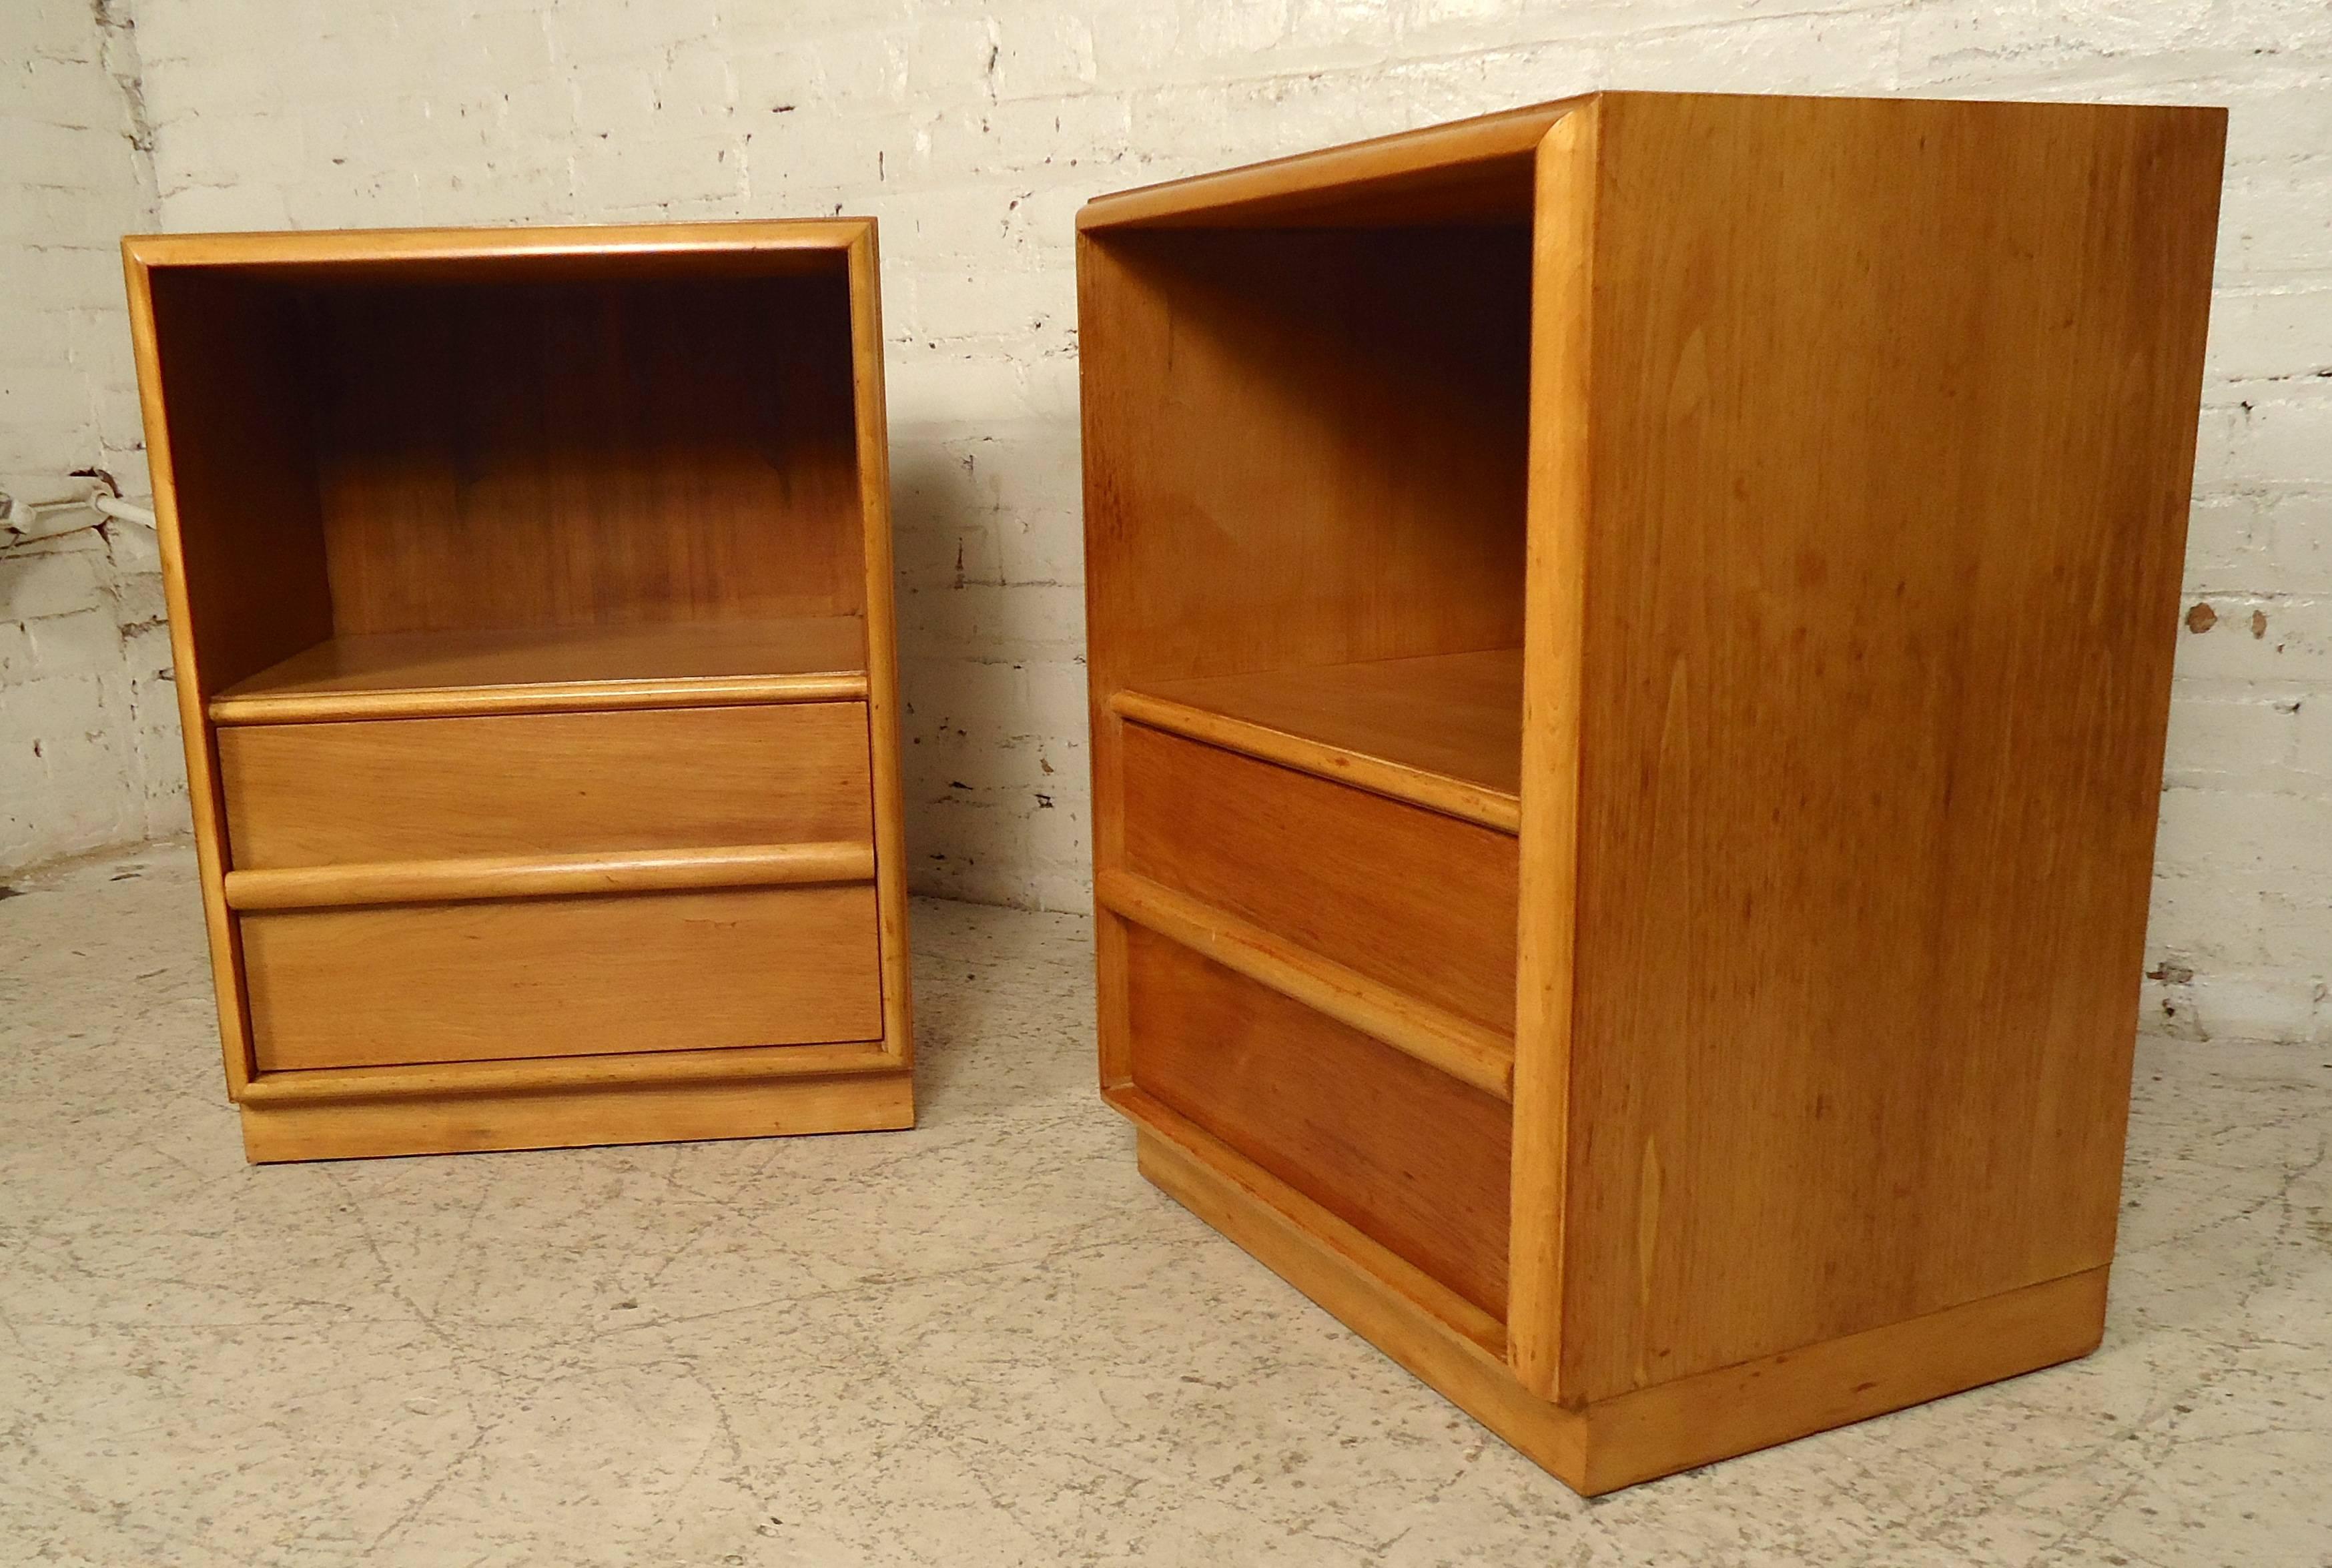 Refinished vintage-modern John Widdicomb end tables feature one large drawer with wood sculpted handles and a top compartment with spacious storage.

Please confirm item location (NY or NJ.)